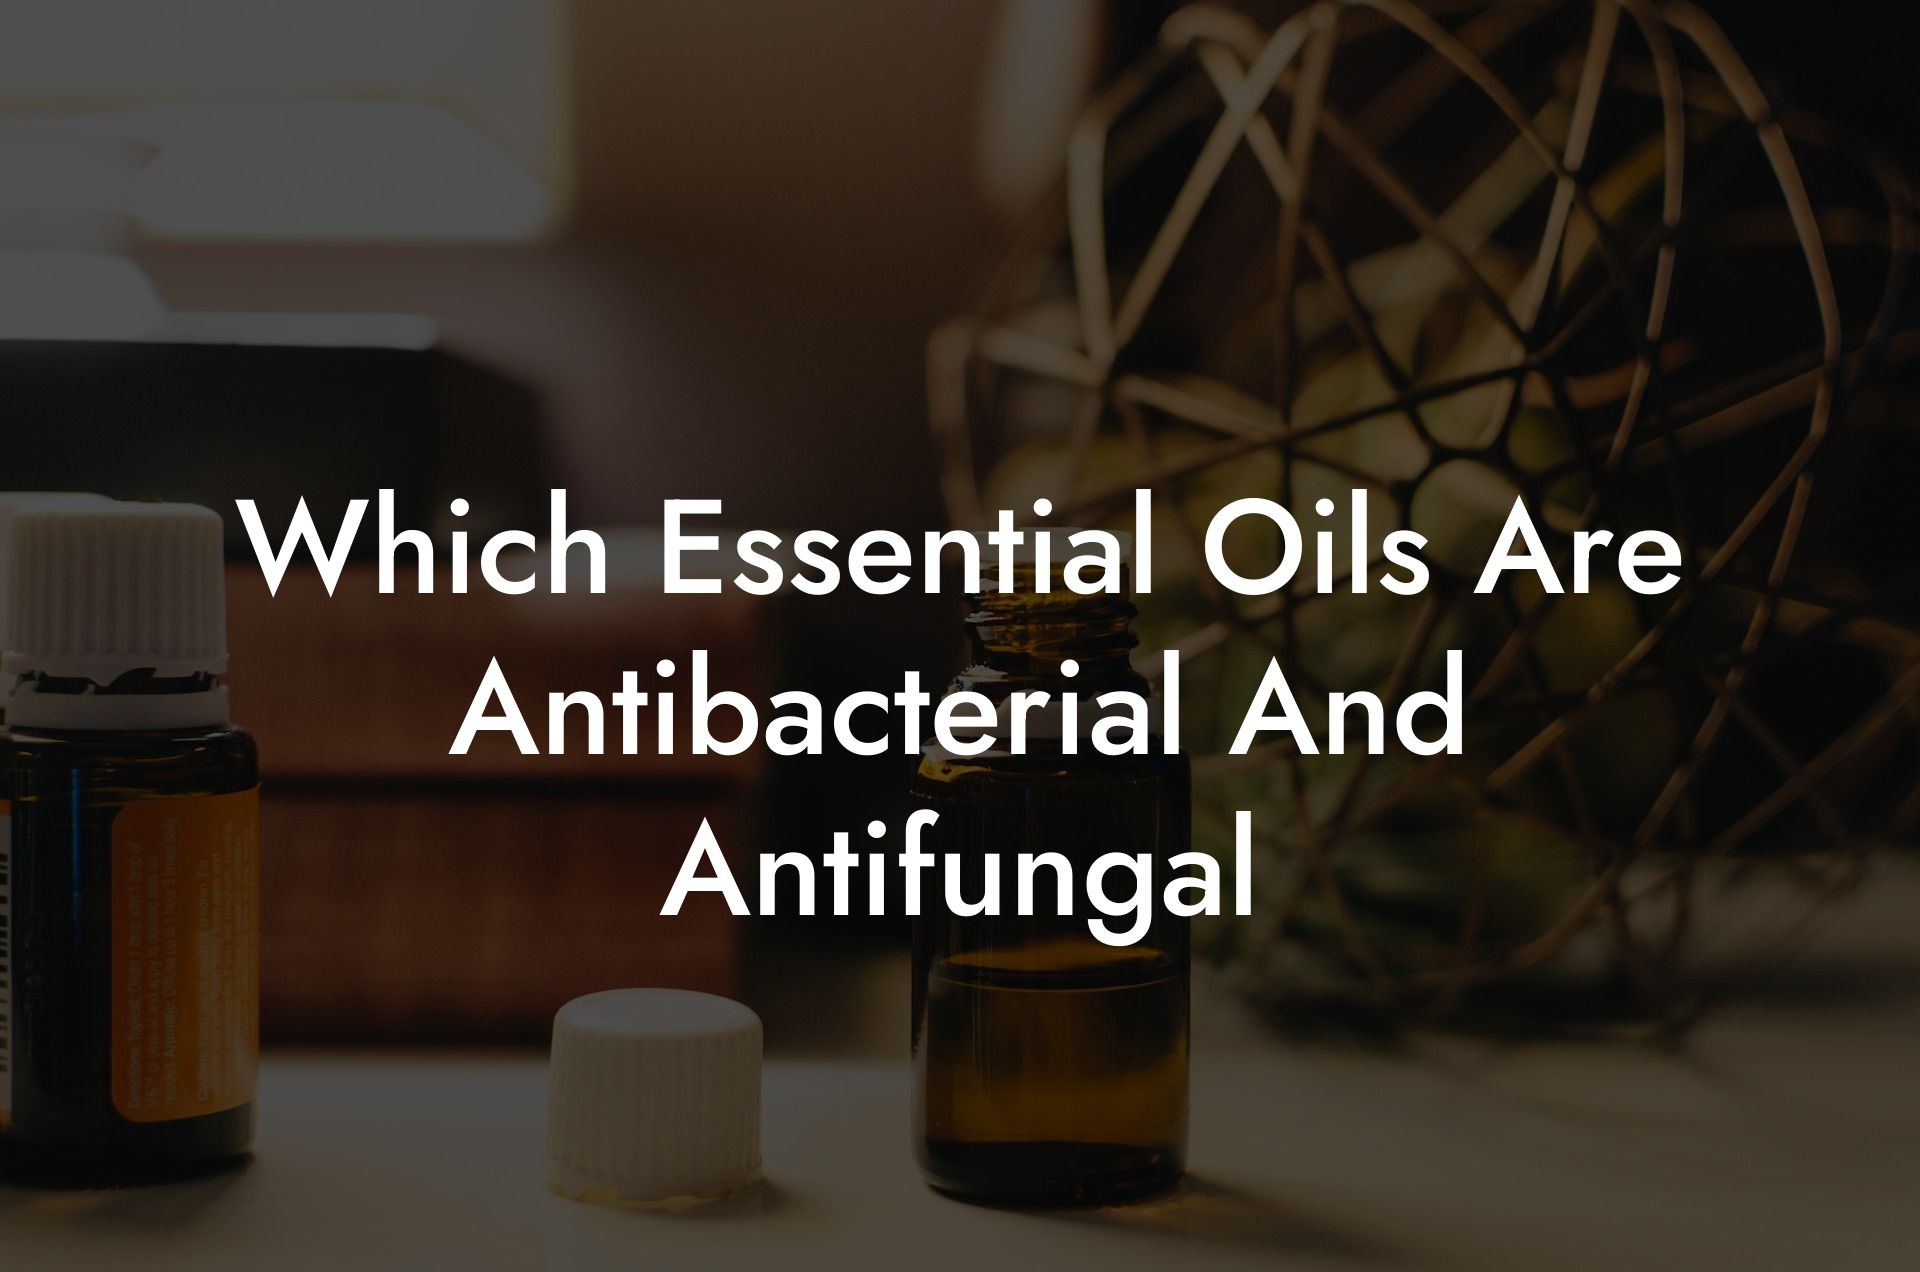 Which Essential Oils Are Antibacterial And Antifungal